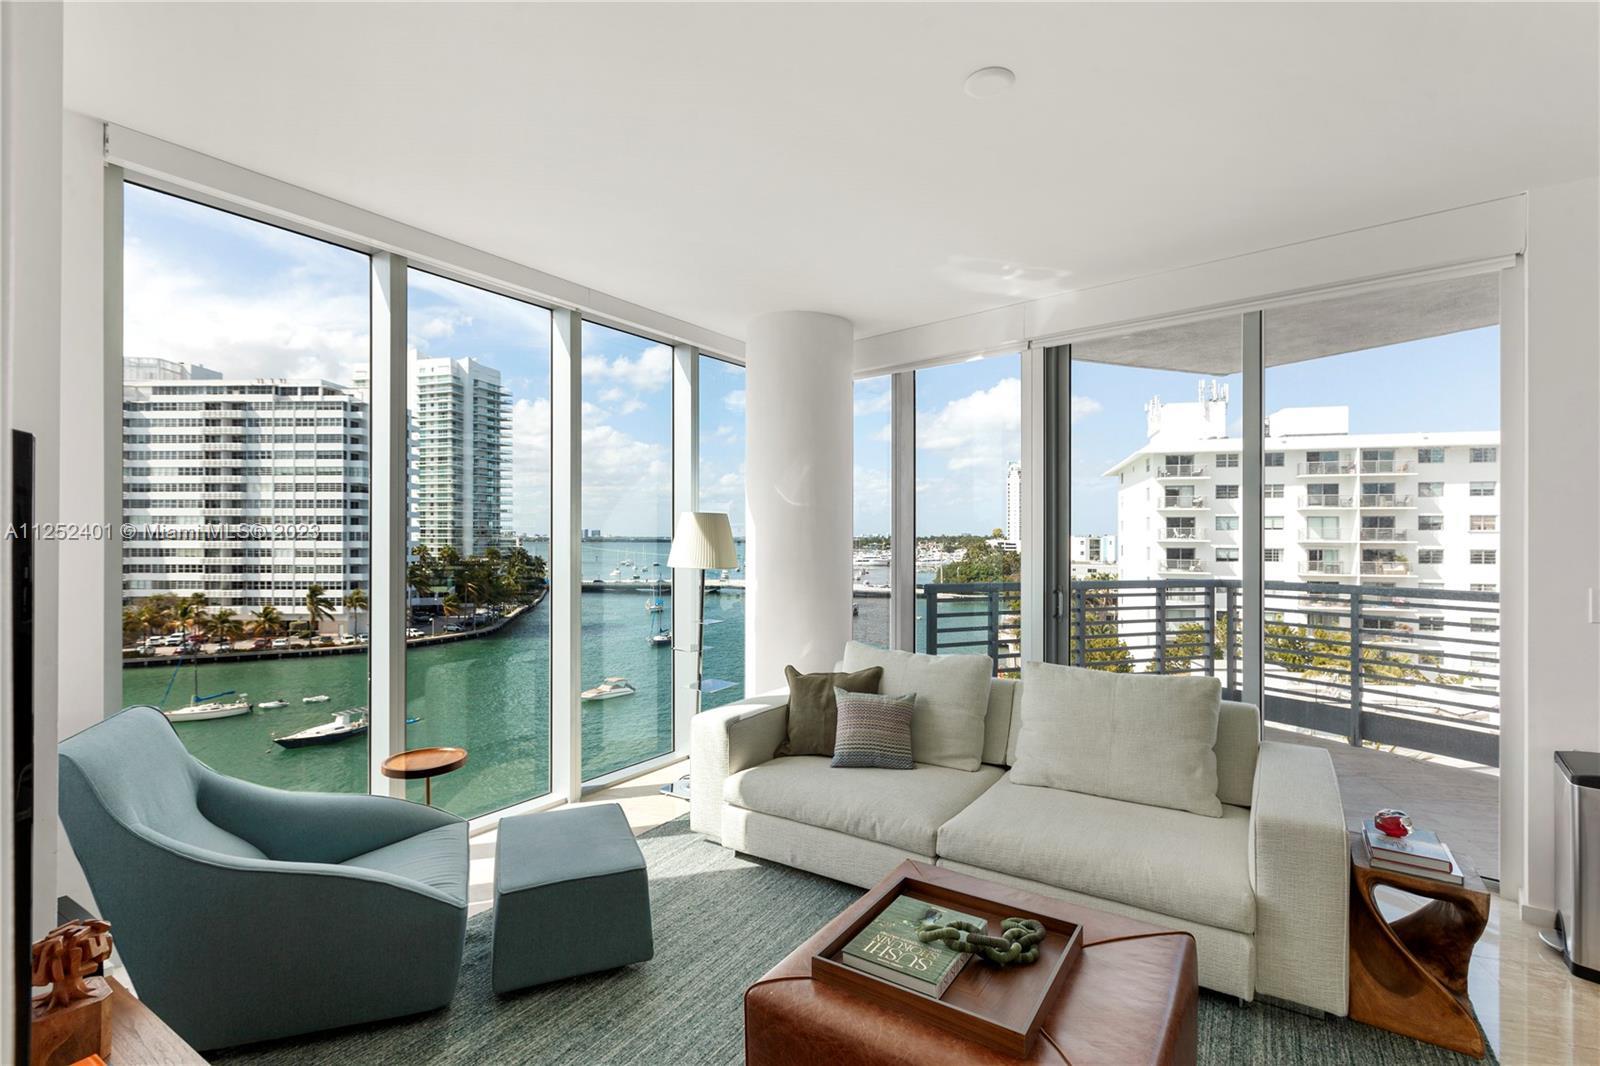 Breathtaking open Biscayne Bay views through out all glass doors and balconies from this corner 2BD 